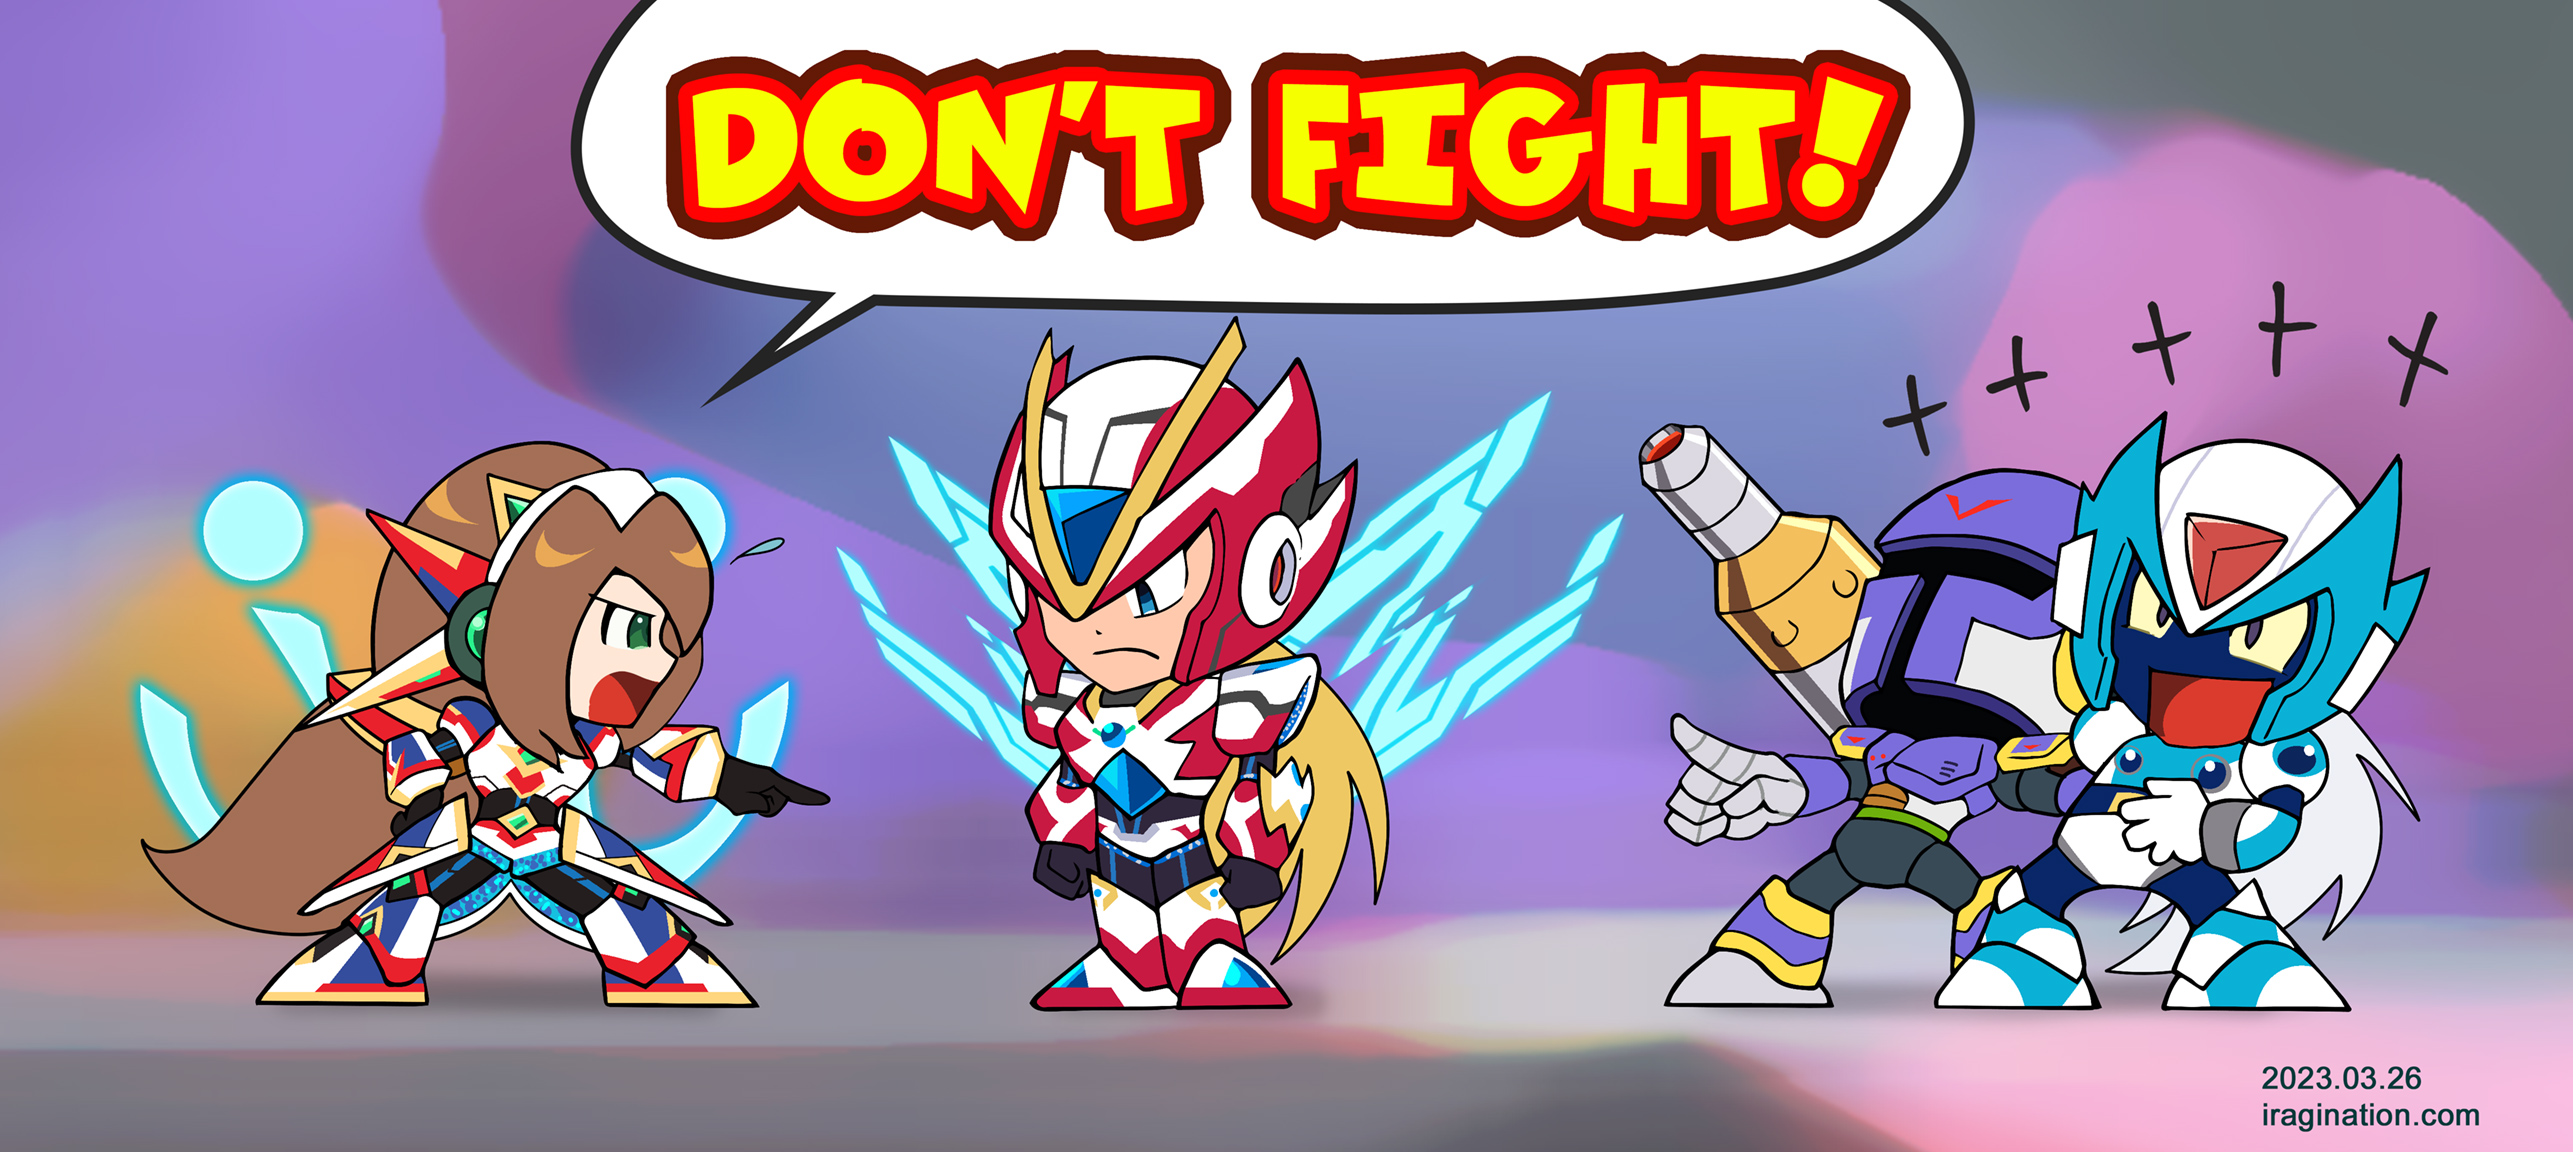 Don’t Fight!
Zero: Player, fight with me.
Iris: What the hell are you talking about? Zero!
Zero: *backs out*

That was more or less straight from the game. Yep, [b]DiVE Armor Zero[/b] got told off not to fight at least two times in a recent [b]Mega Man X DiVE[/b] event by [b]DiVE Armor Iris[/b]. And he meekly complied. 

If only that was so easy to pull off before. I will pretend this is the effect of the DiVE Armor.

Mega Man X DiVE © CAPCOM
Keywords: zero iris via vile